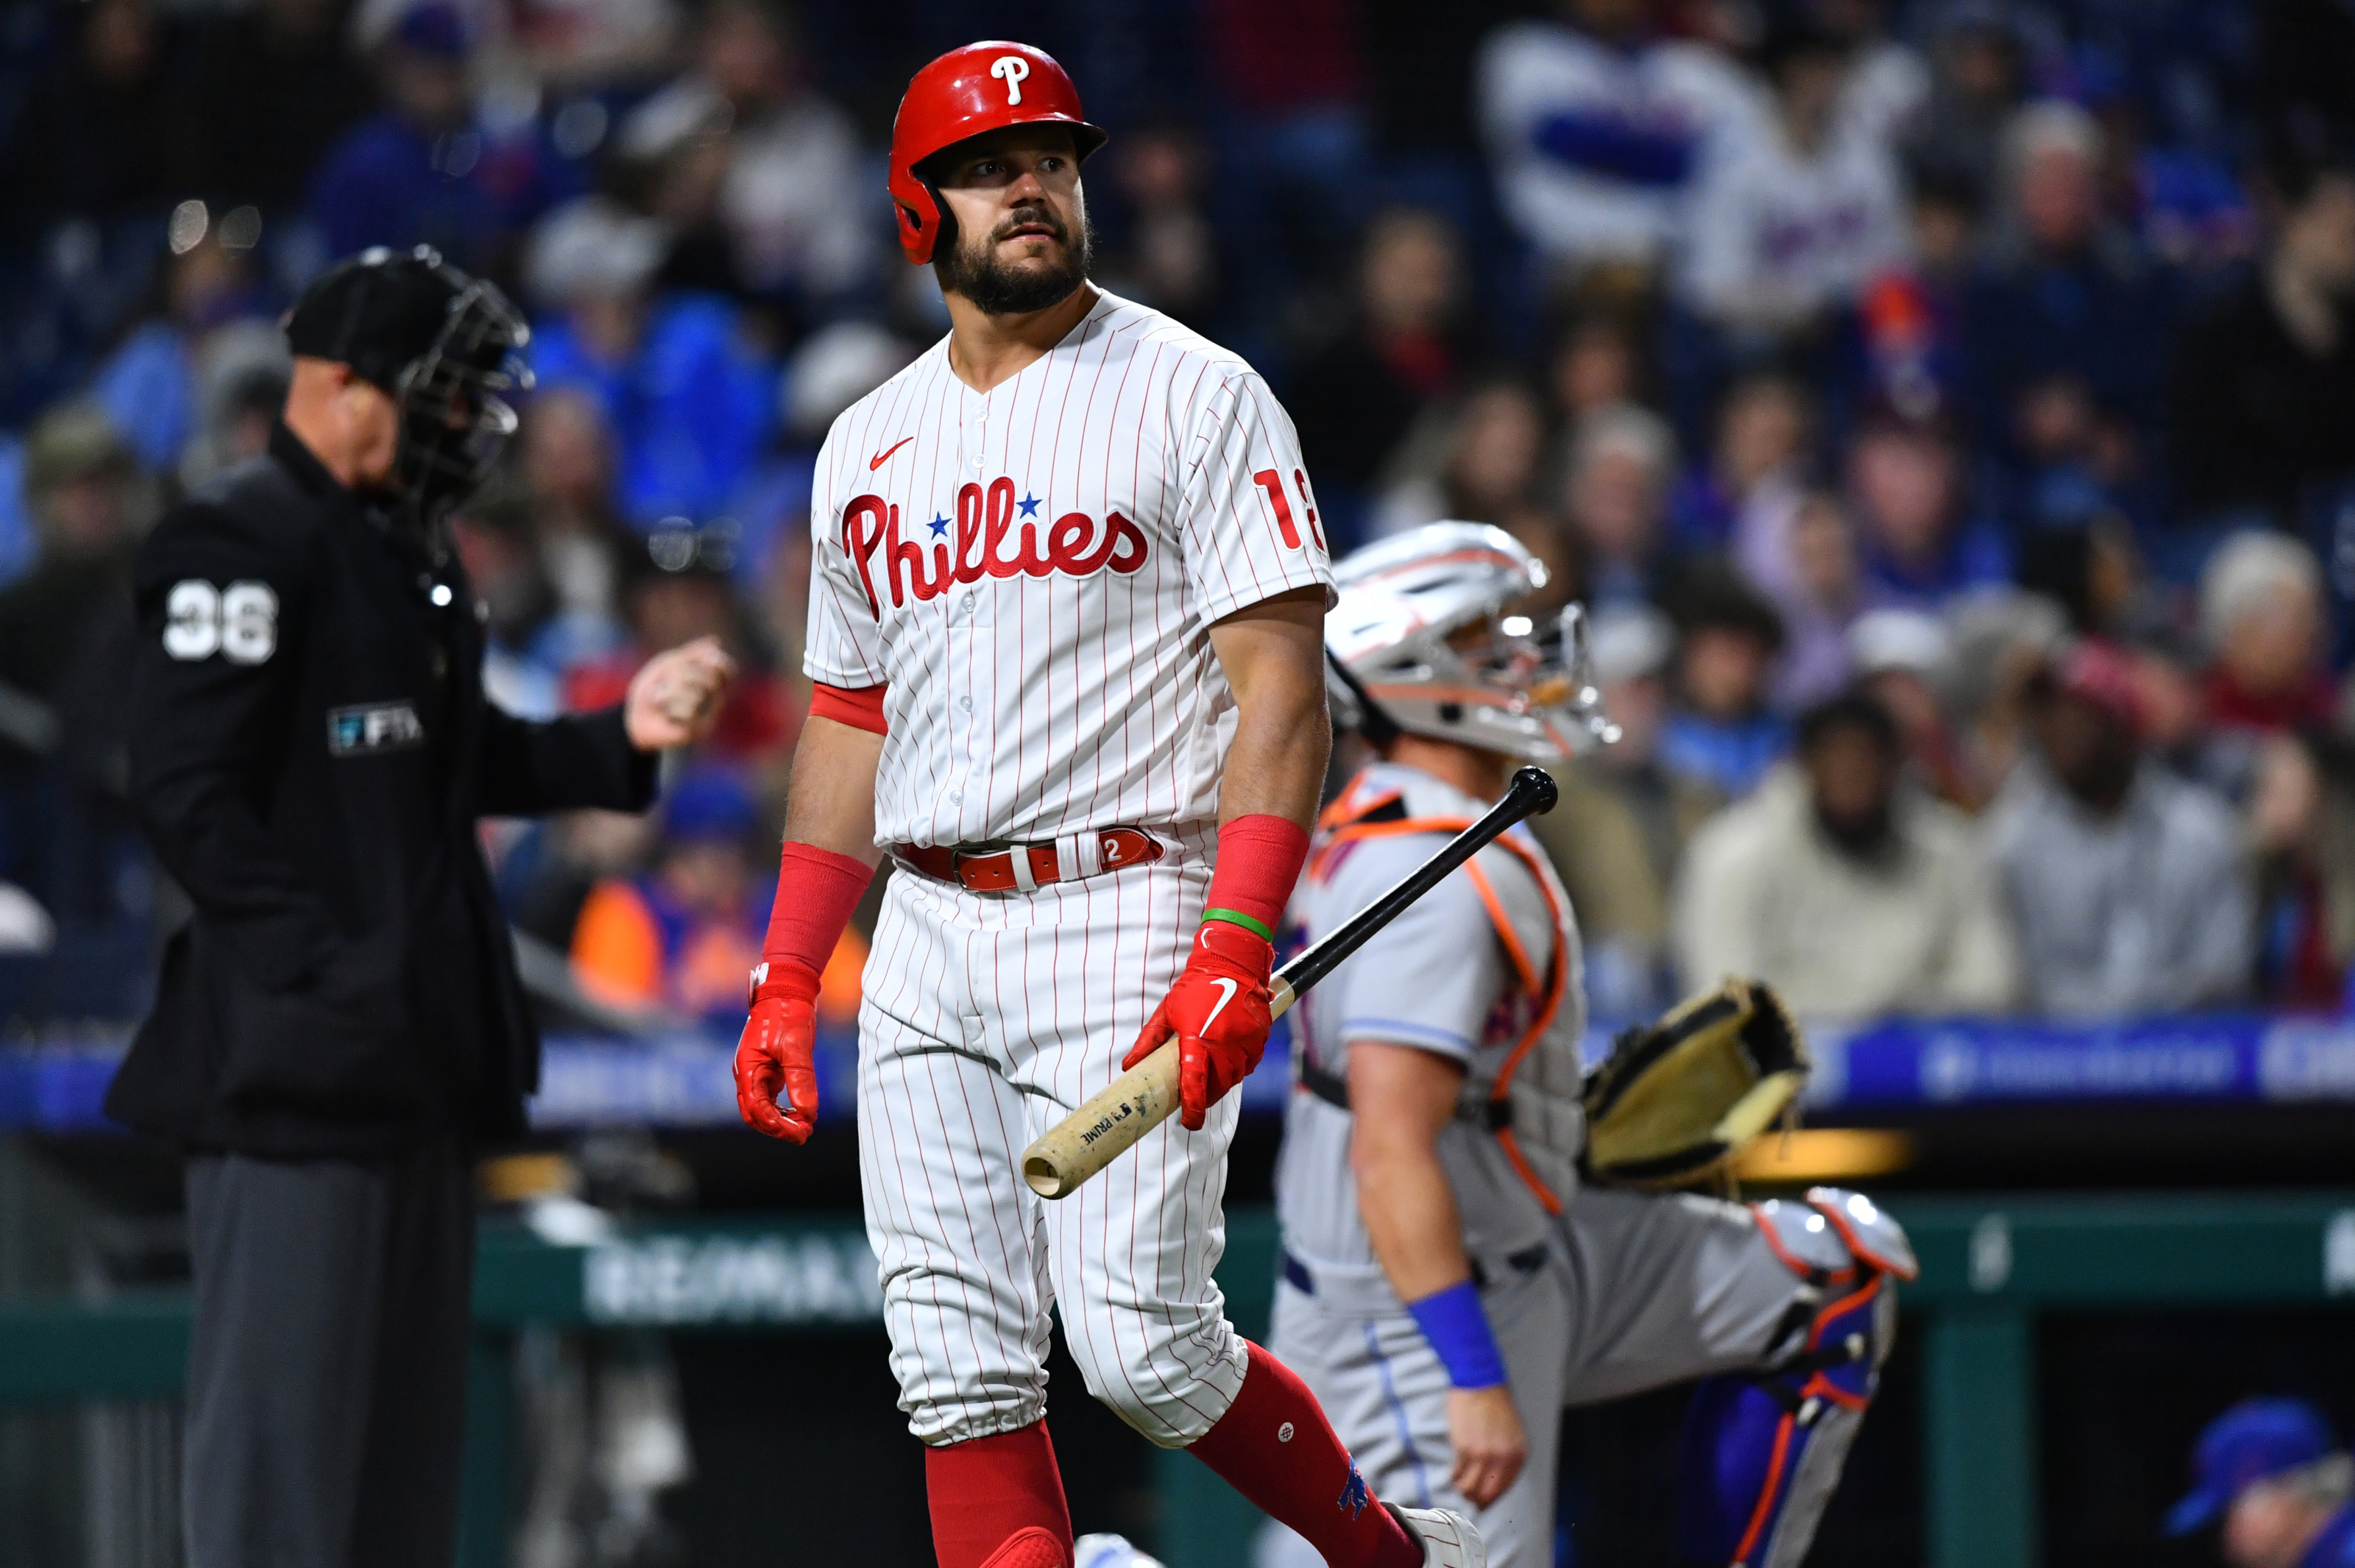 Phillies: One fatal flaw that will prevent Philadelphia from